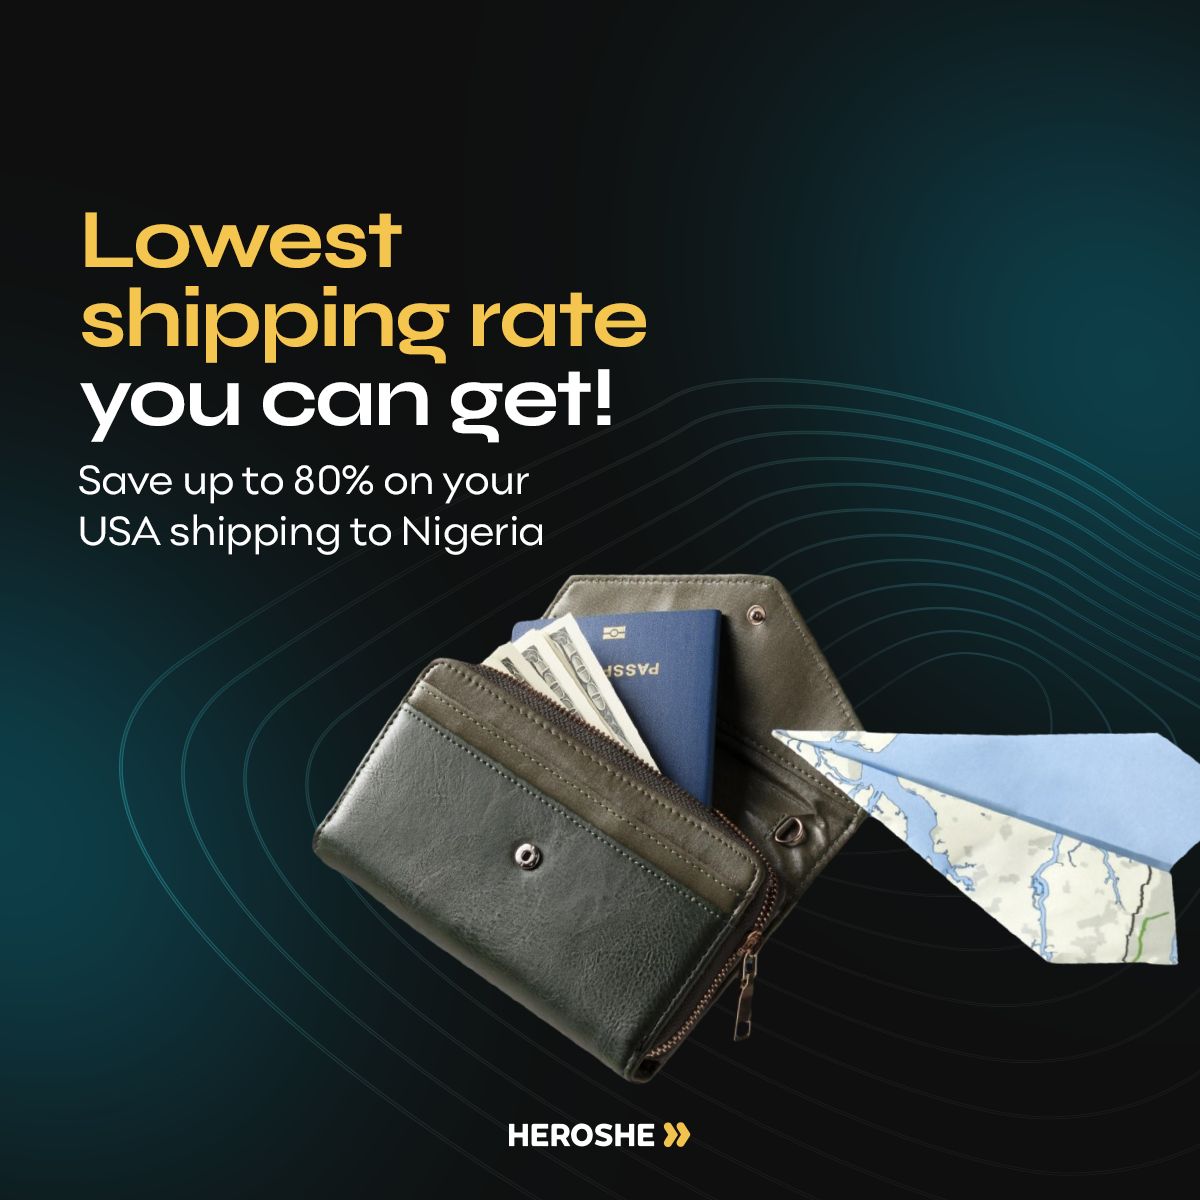 lowest shipping rate with heroshe